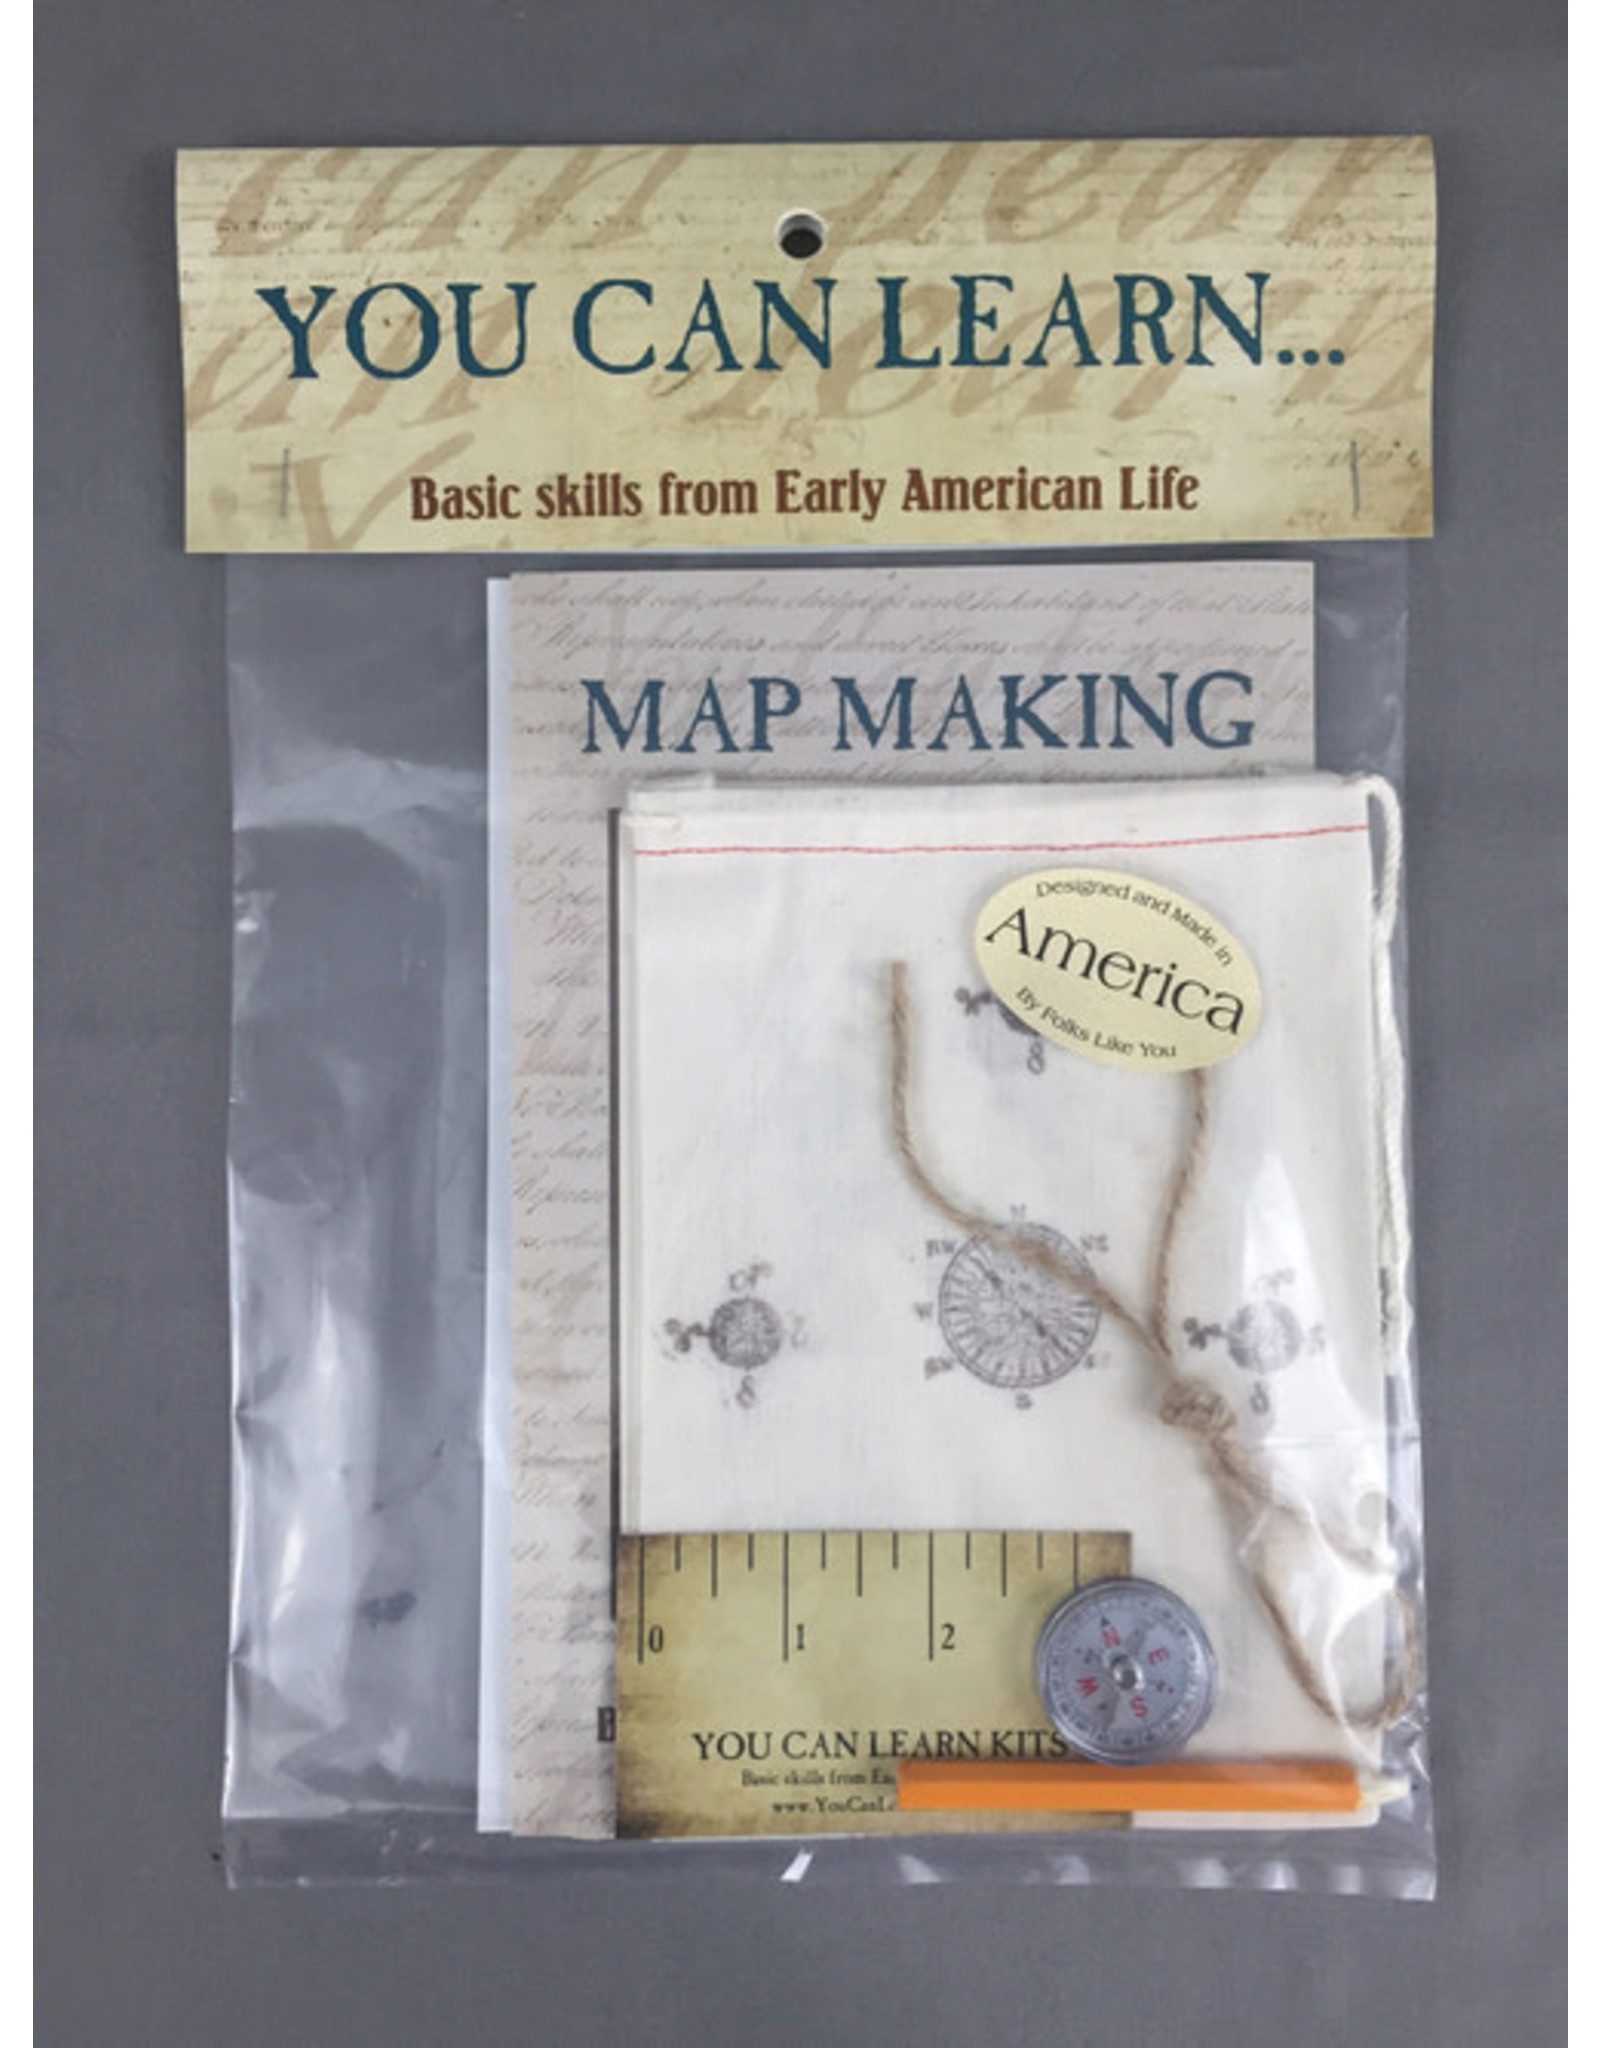 You Can Learn Kits - Map Making